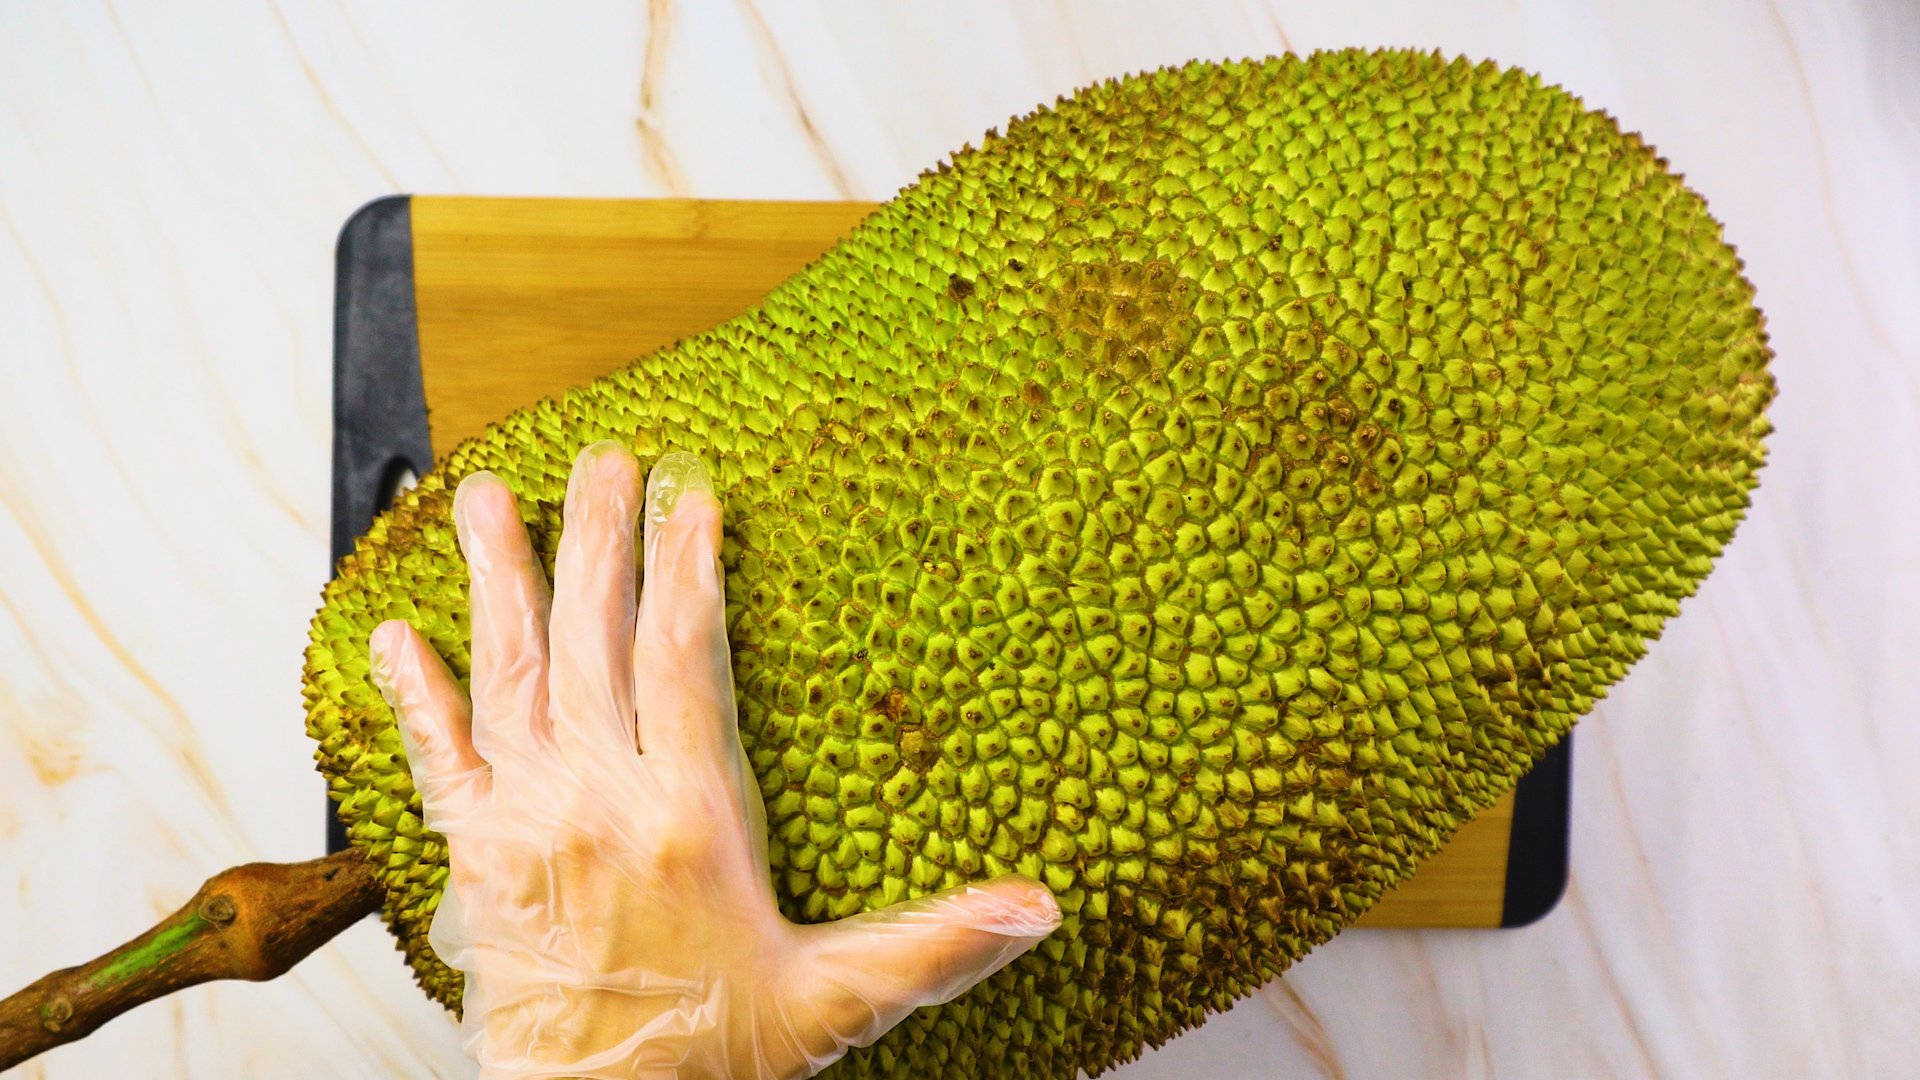 Experiencing Nature's Bounty: Holding a Ripe Jackfruit Wallpaper